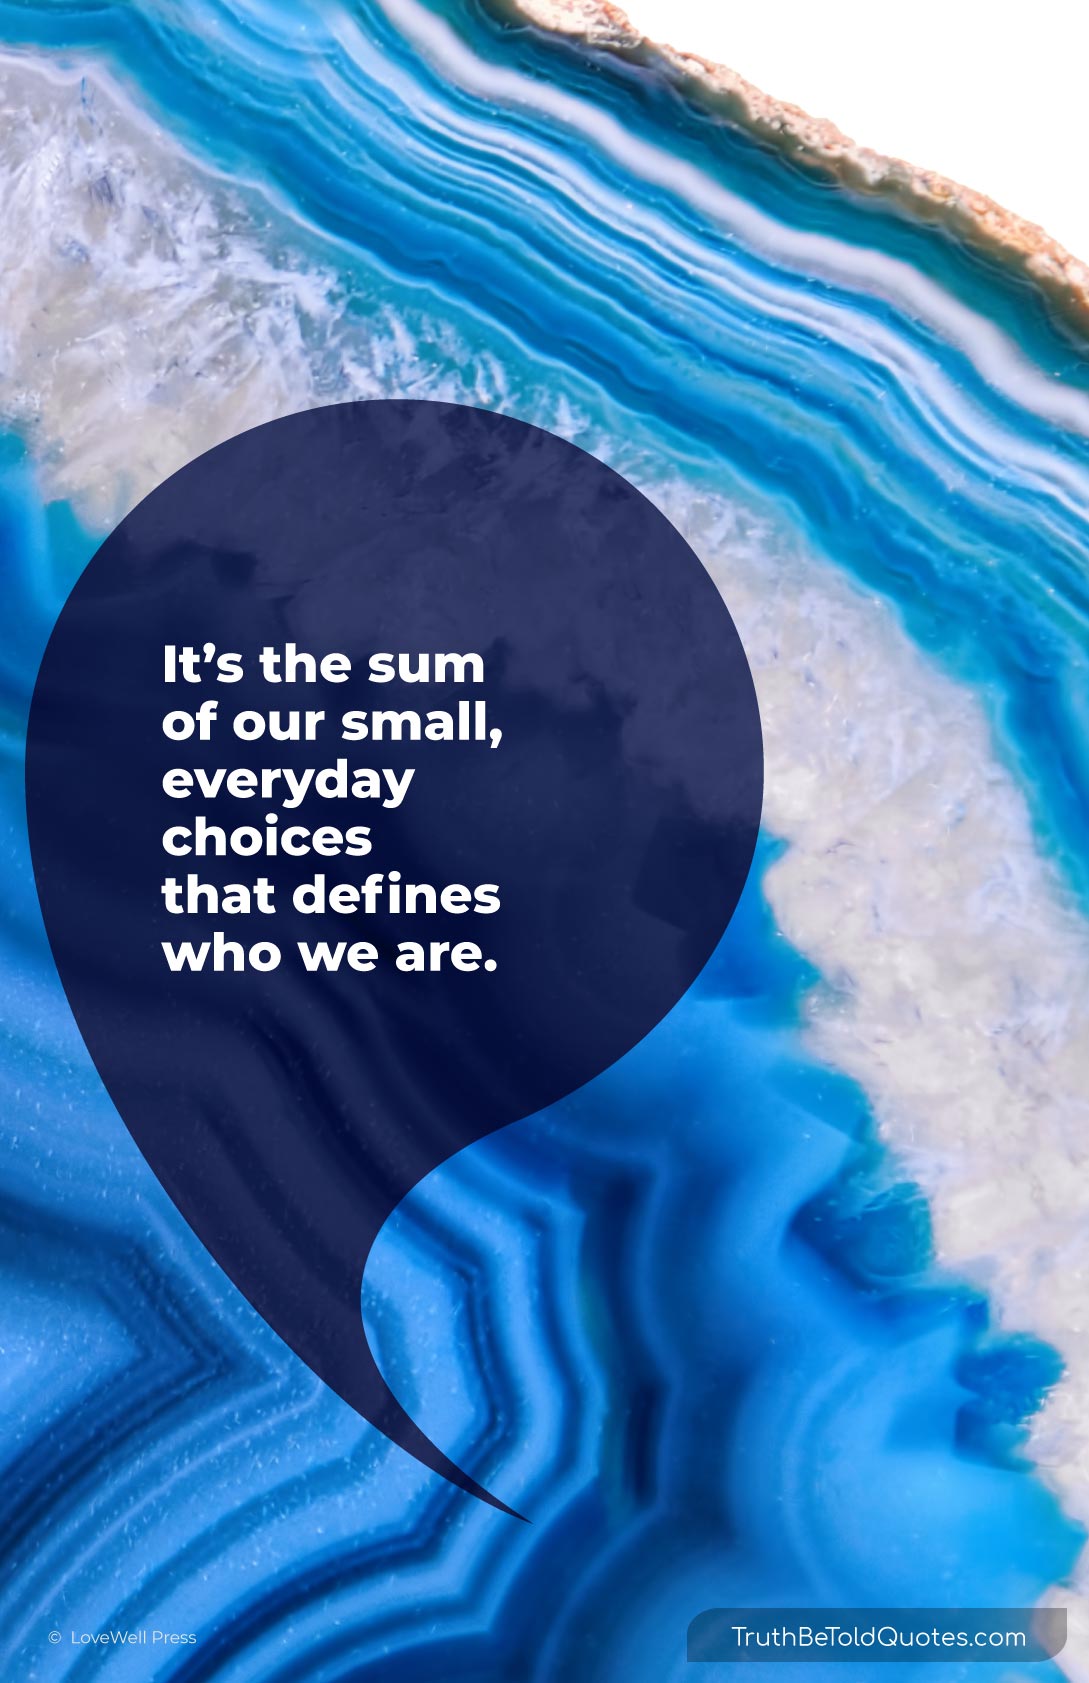 Quote on character- 'It's the sum of our small everyday choices that defines who we are